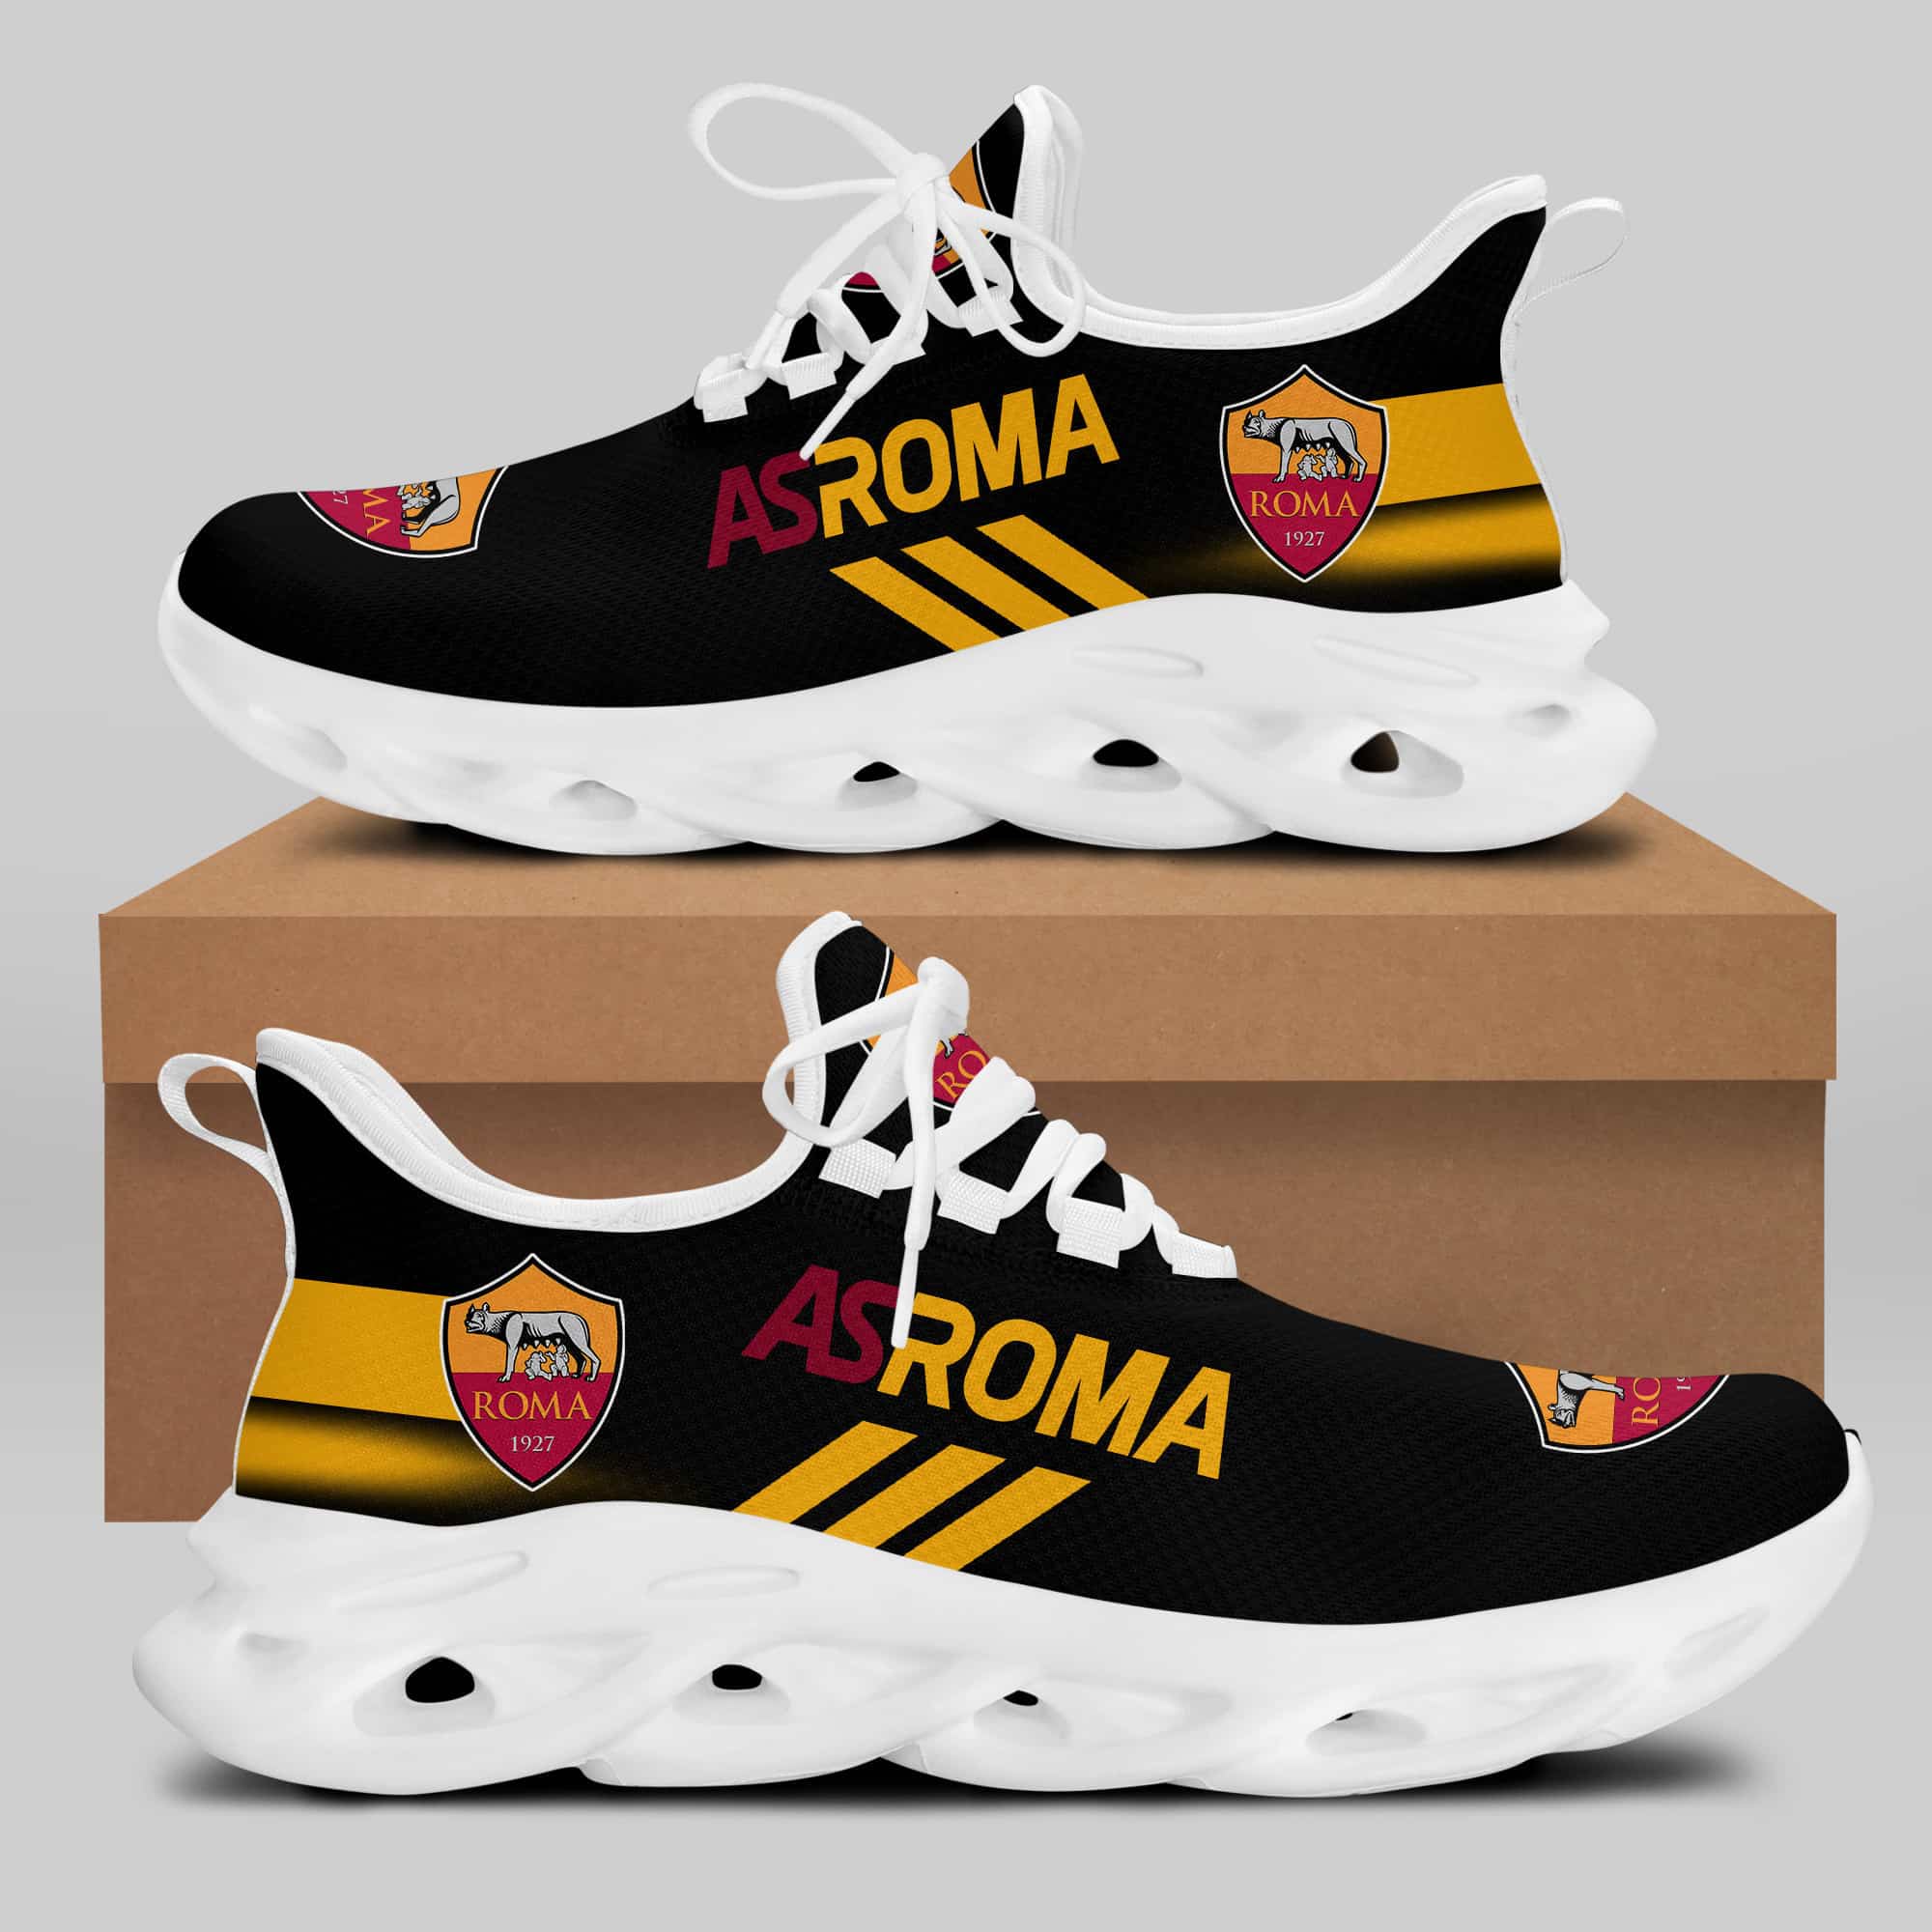 As Roma Running Shoes Max Soul Shoes Sneakers Ver 28 2